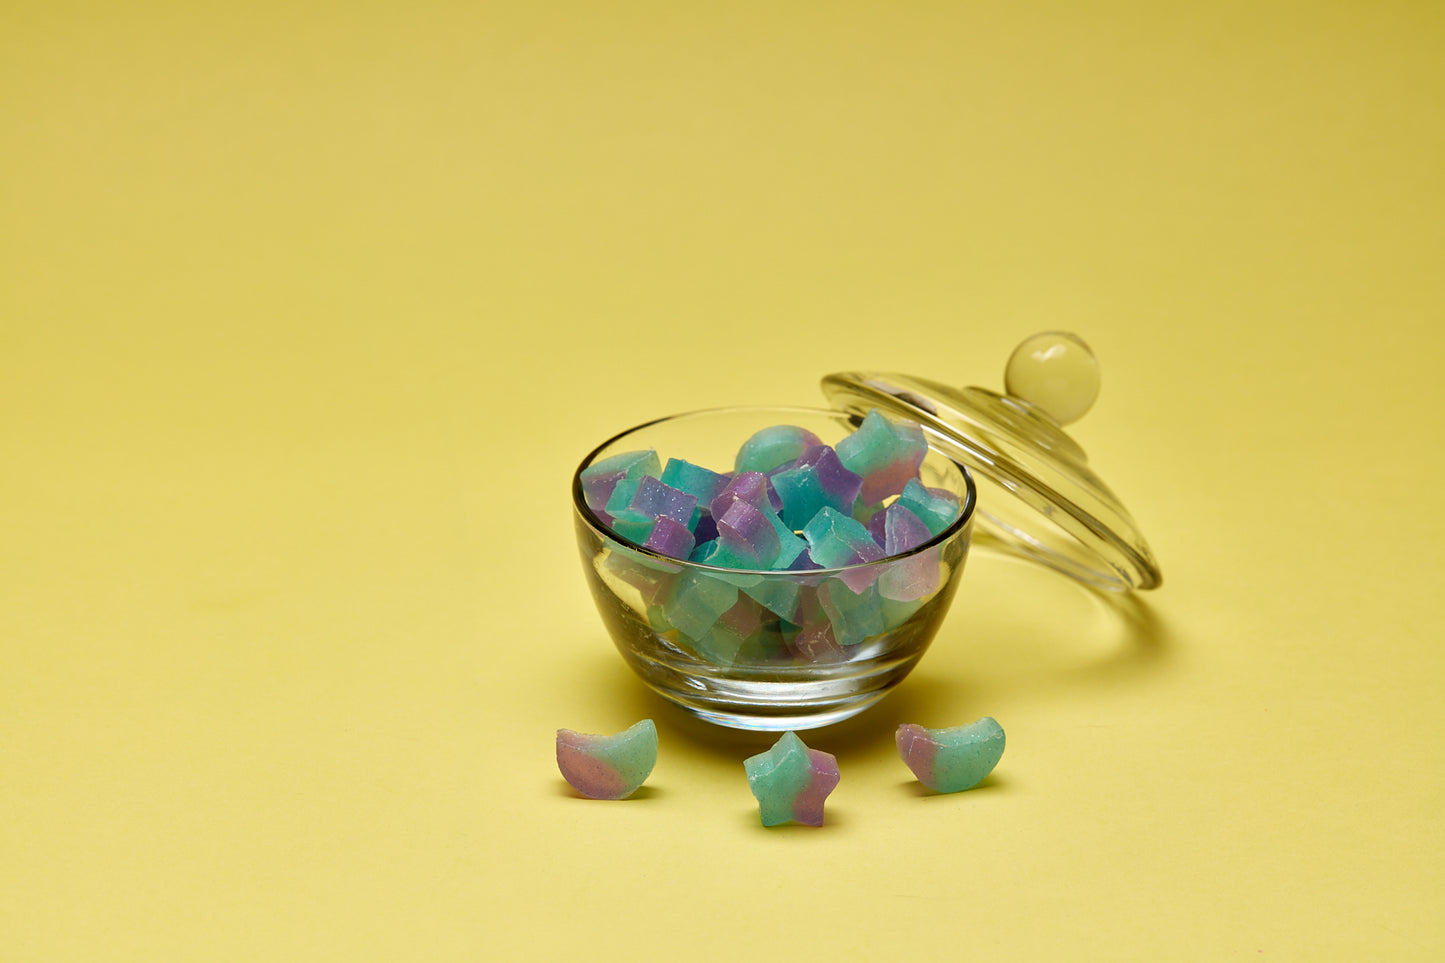 A photo of moon and star shaped blue/green and purple with glitter mini soaps in a glass bowl, lid leaning against it on a yellow background.